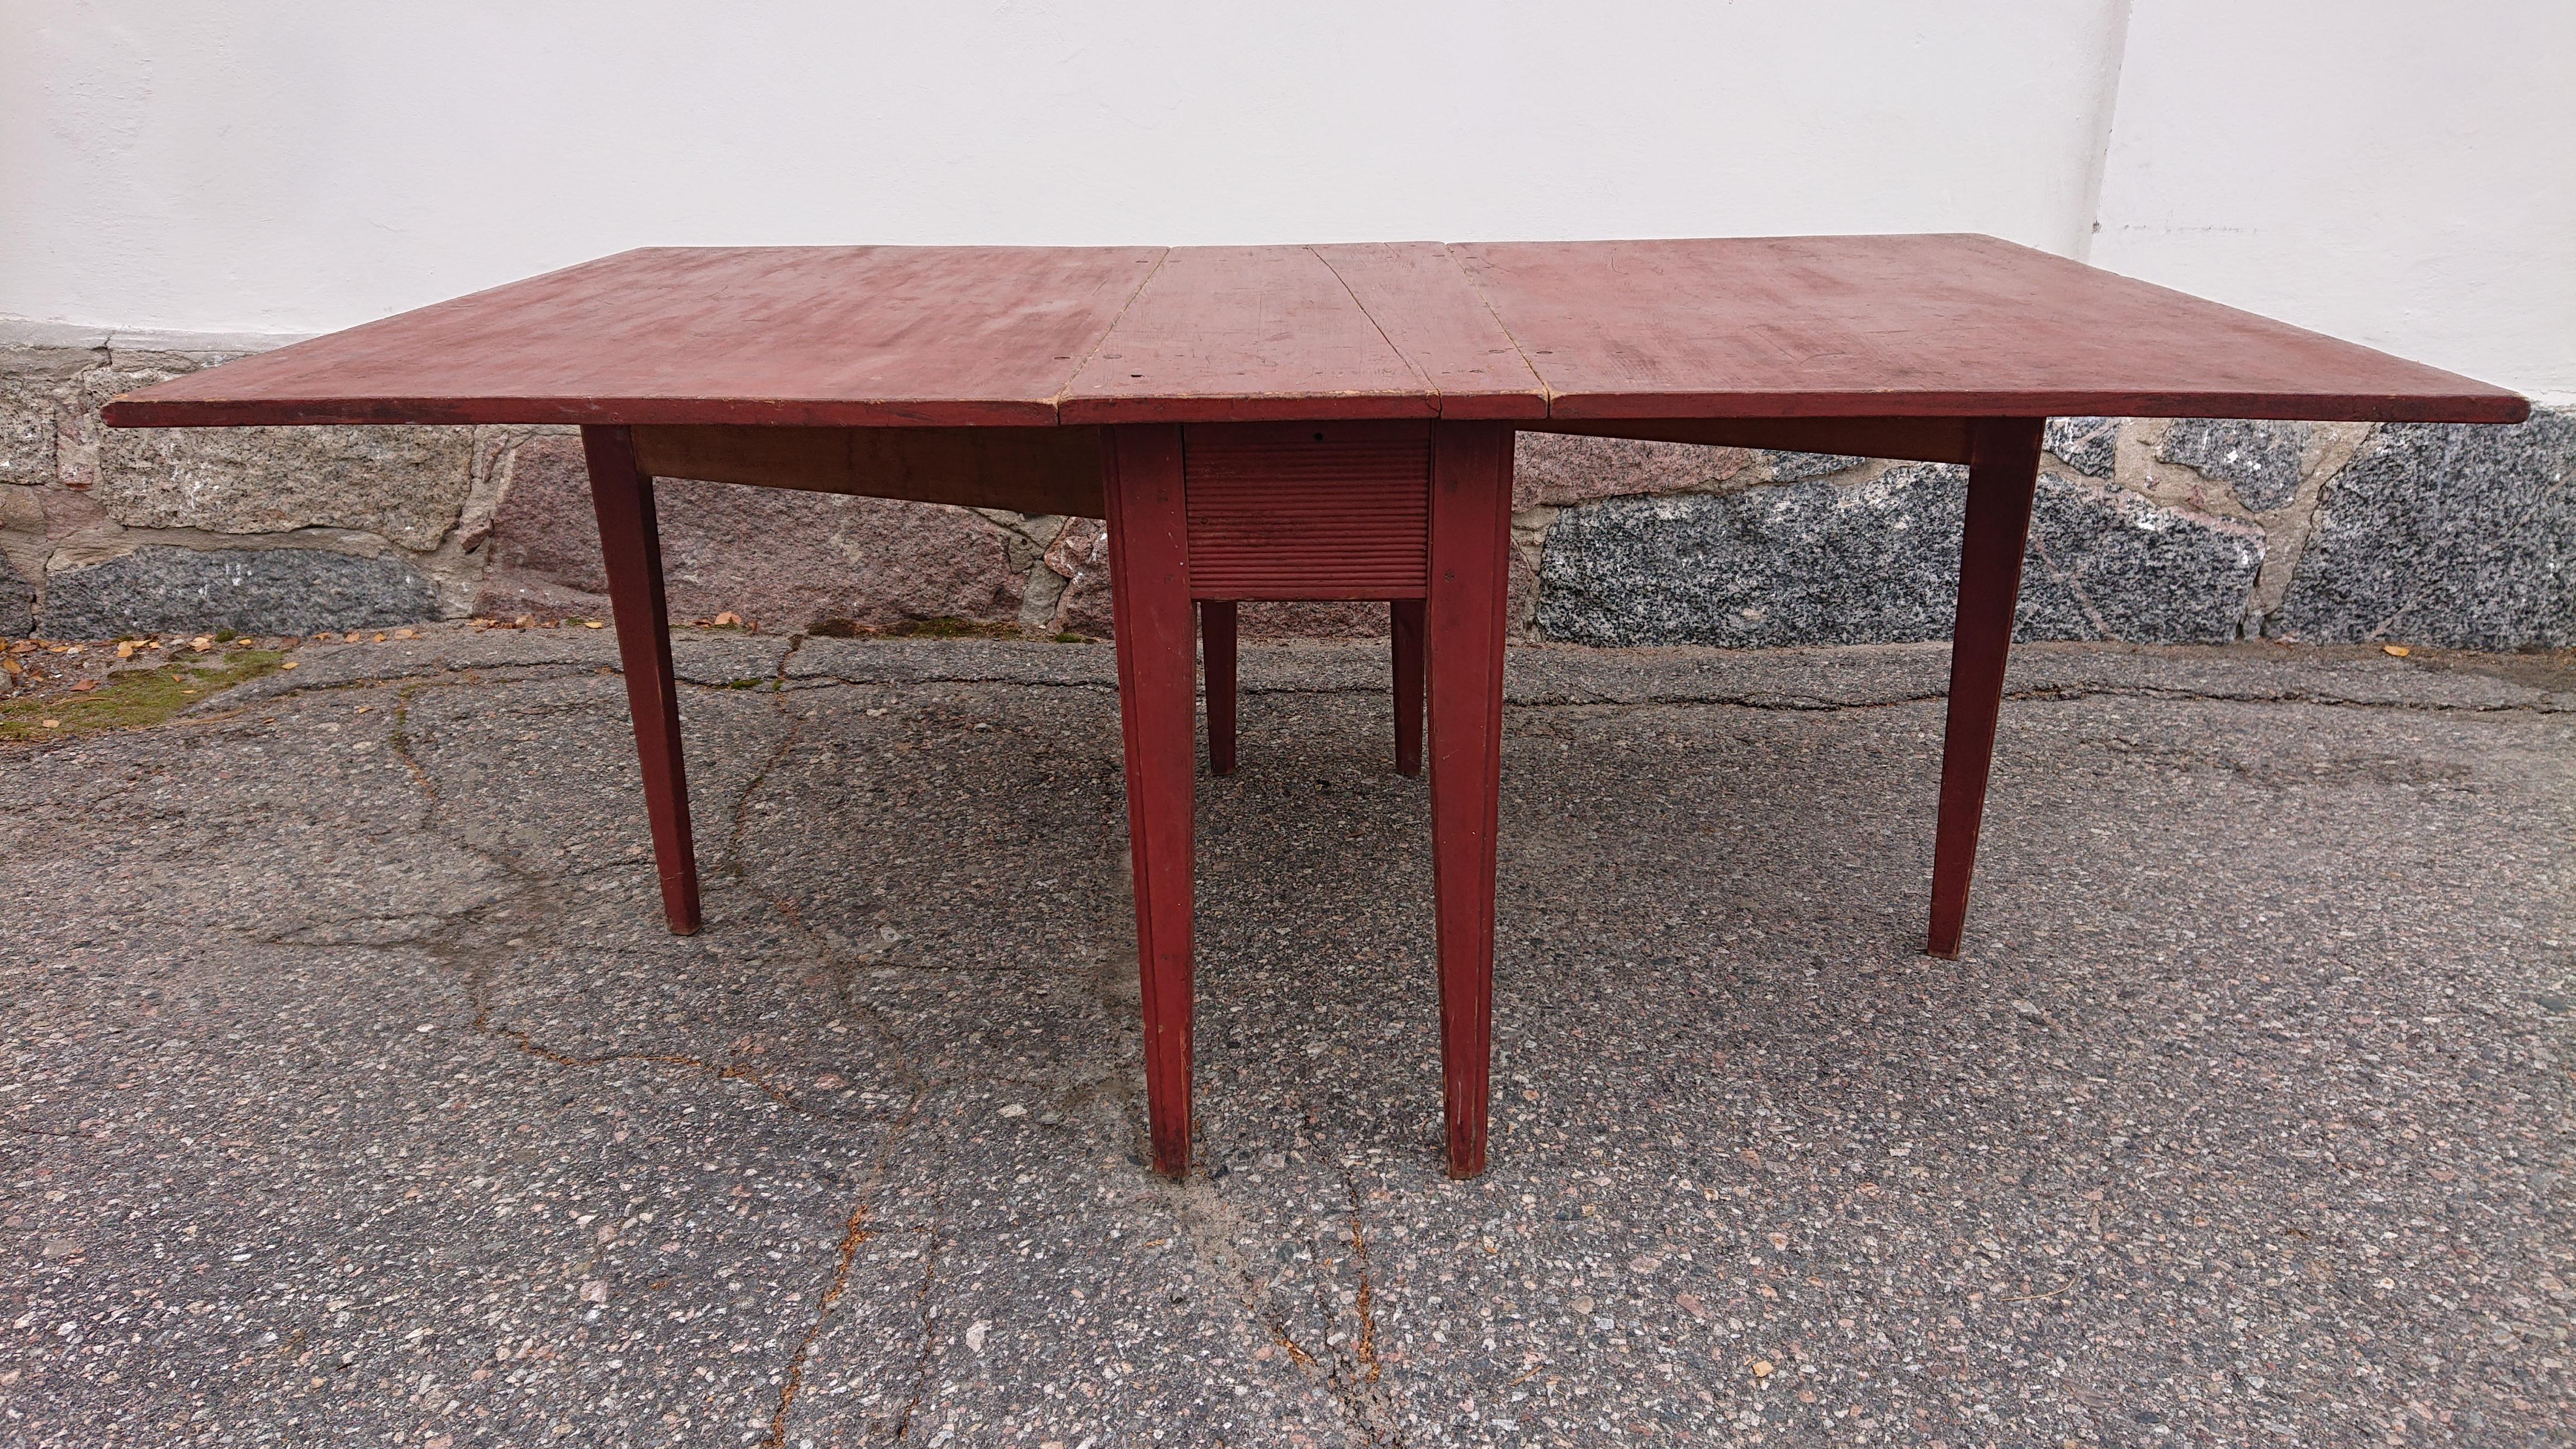 19th Century Swedish drop leaf table from Skelleftea Vasterbotten, Northern Sweden.

Measurements H. 77cm W. 181cm D. 114cm
The measurements shown in the listing is when the Drop Leaf are folded down for an accurate shipping quote.

This